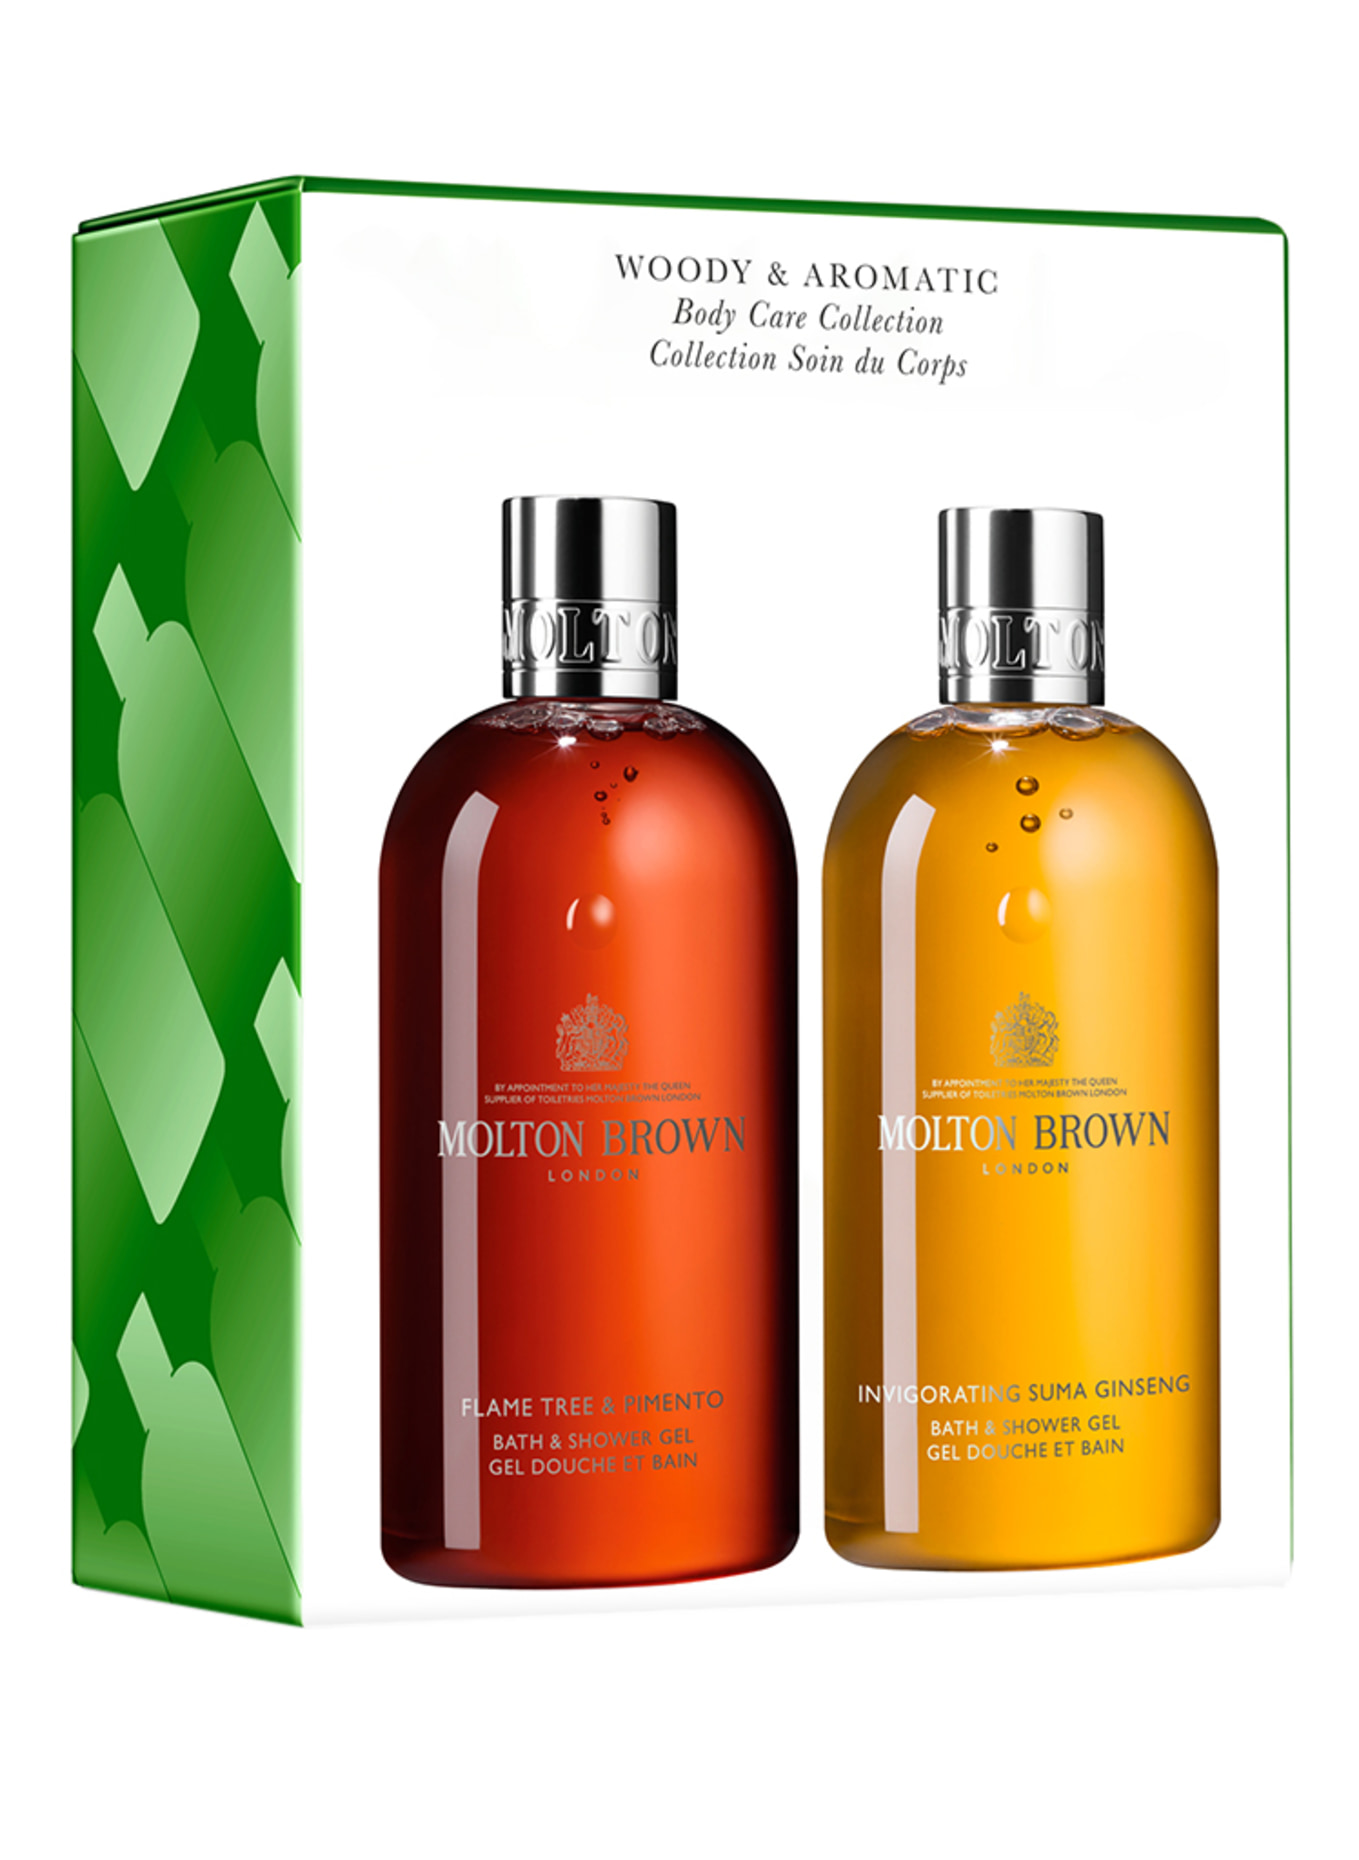 MOLTON BROWN WOODY & AROMATIC BODY CARE COLLECTION (Obrázek 1)